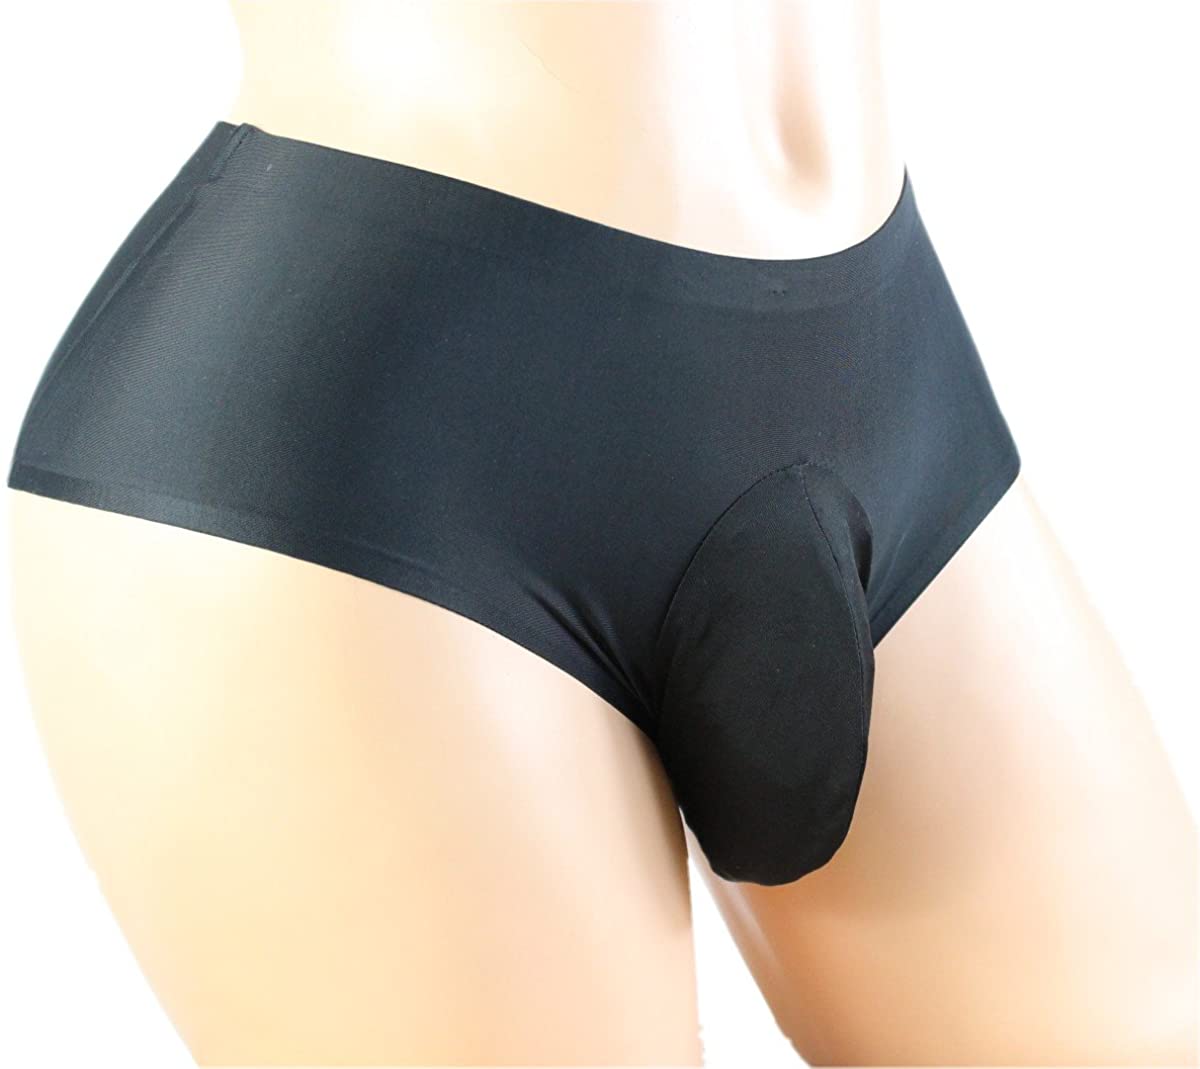 Black hipster brief sissy pouch panties